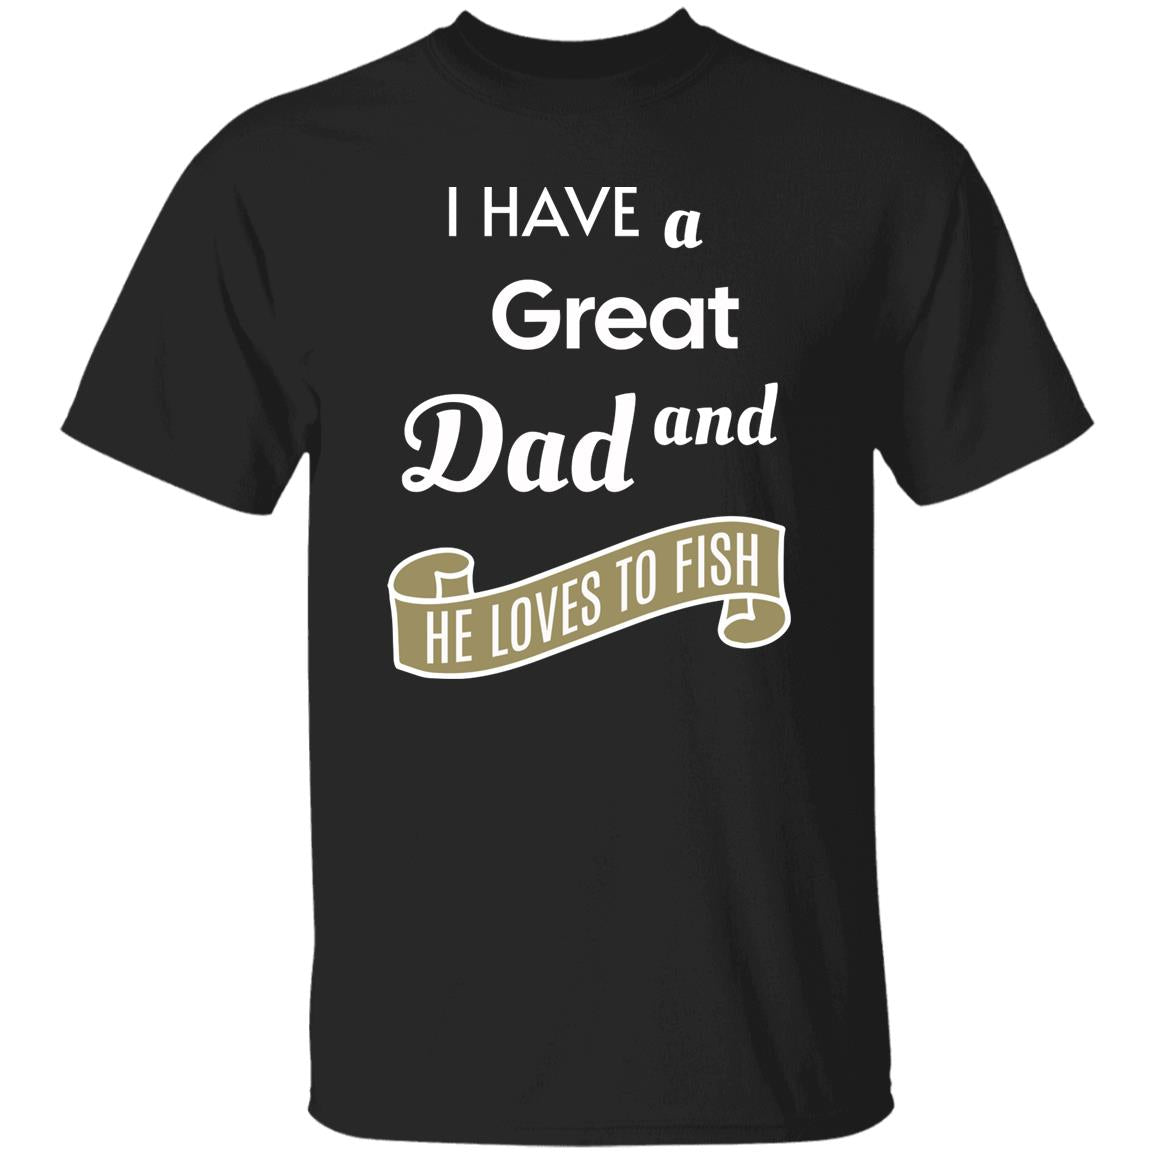 I have a great dad and he loves fishing k t-shirt black